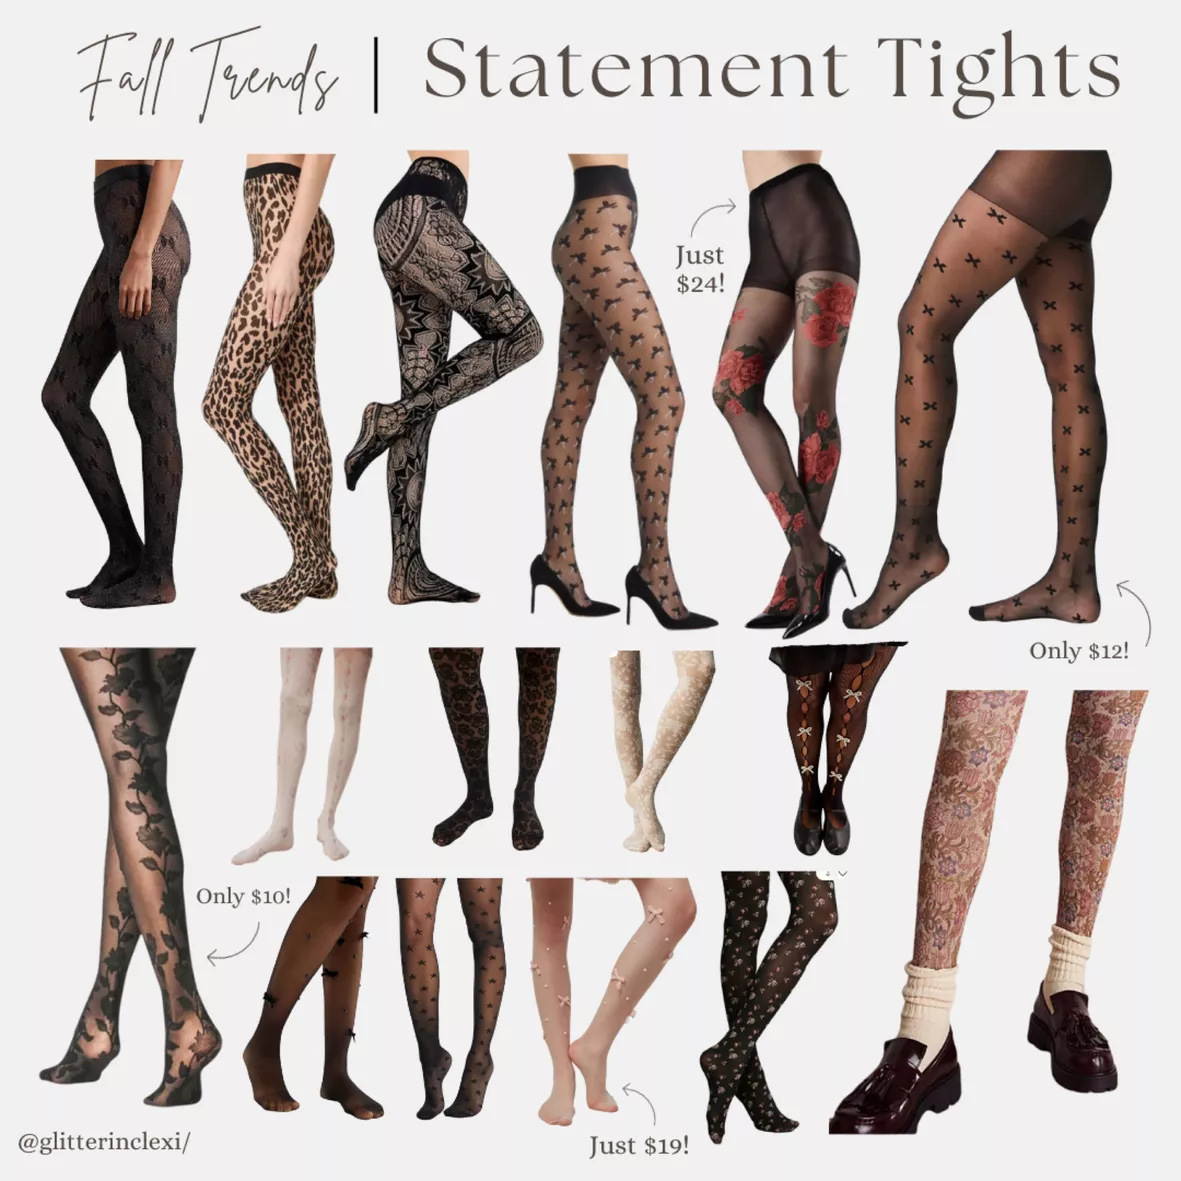  HONENNA Patterned Fishnets Tights Black Pantyhose Stockings  For Women